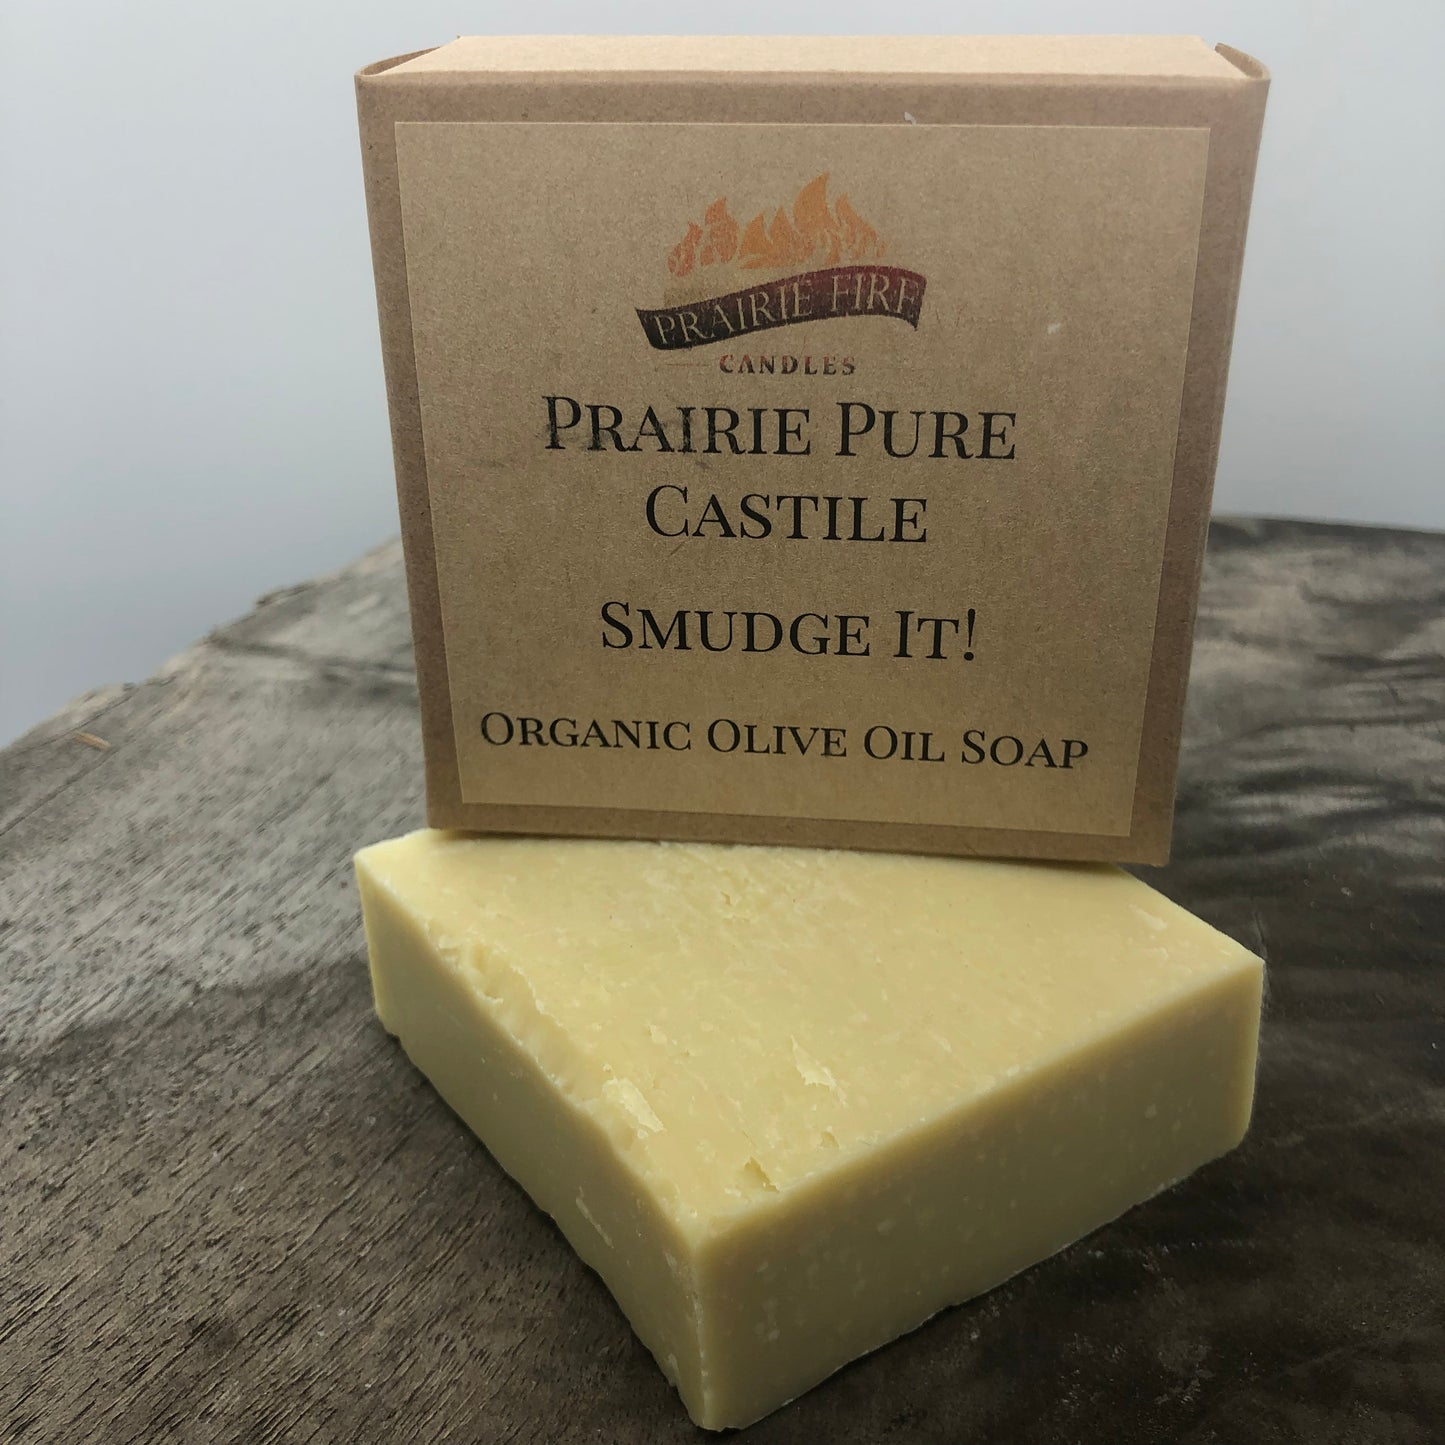 smudge it! real castile organic olive oil soap for sensitive skin - dye free - 100% certified organic extra virgin olive oil by prairie fire tallow, candles, and lavender